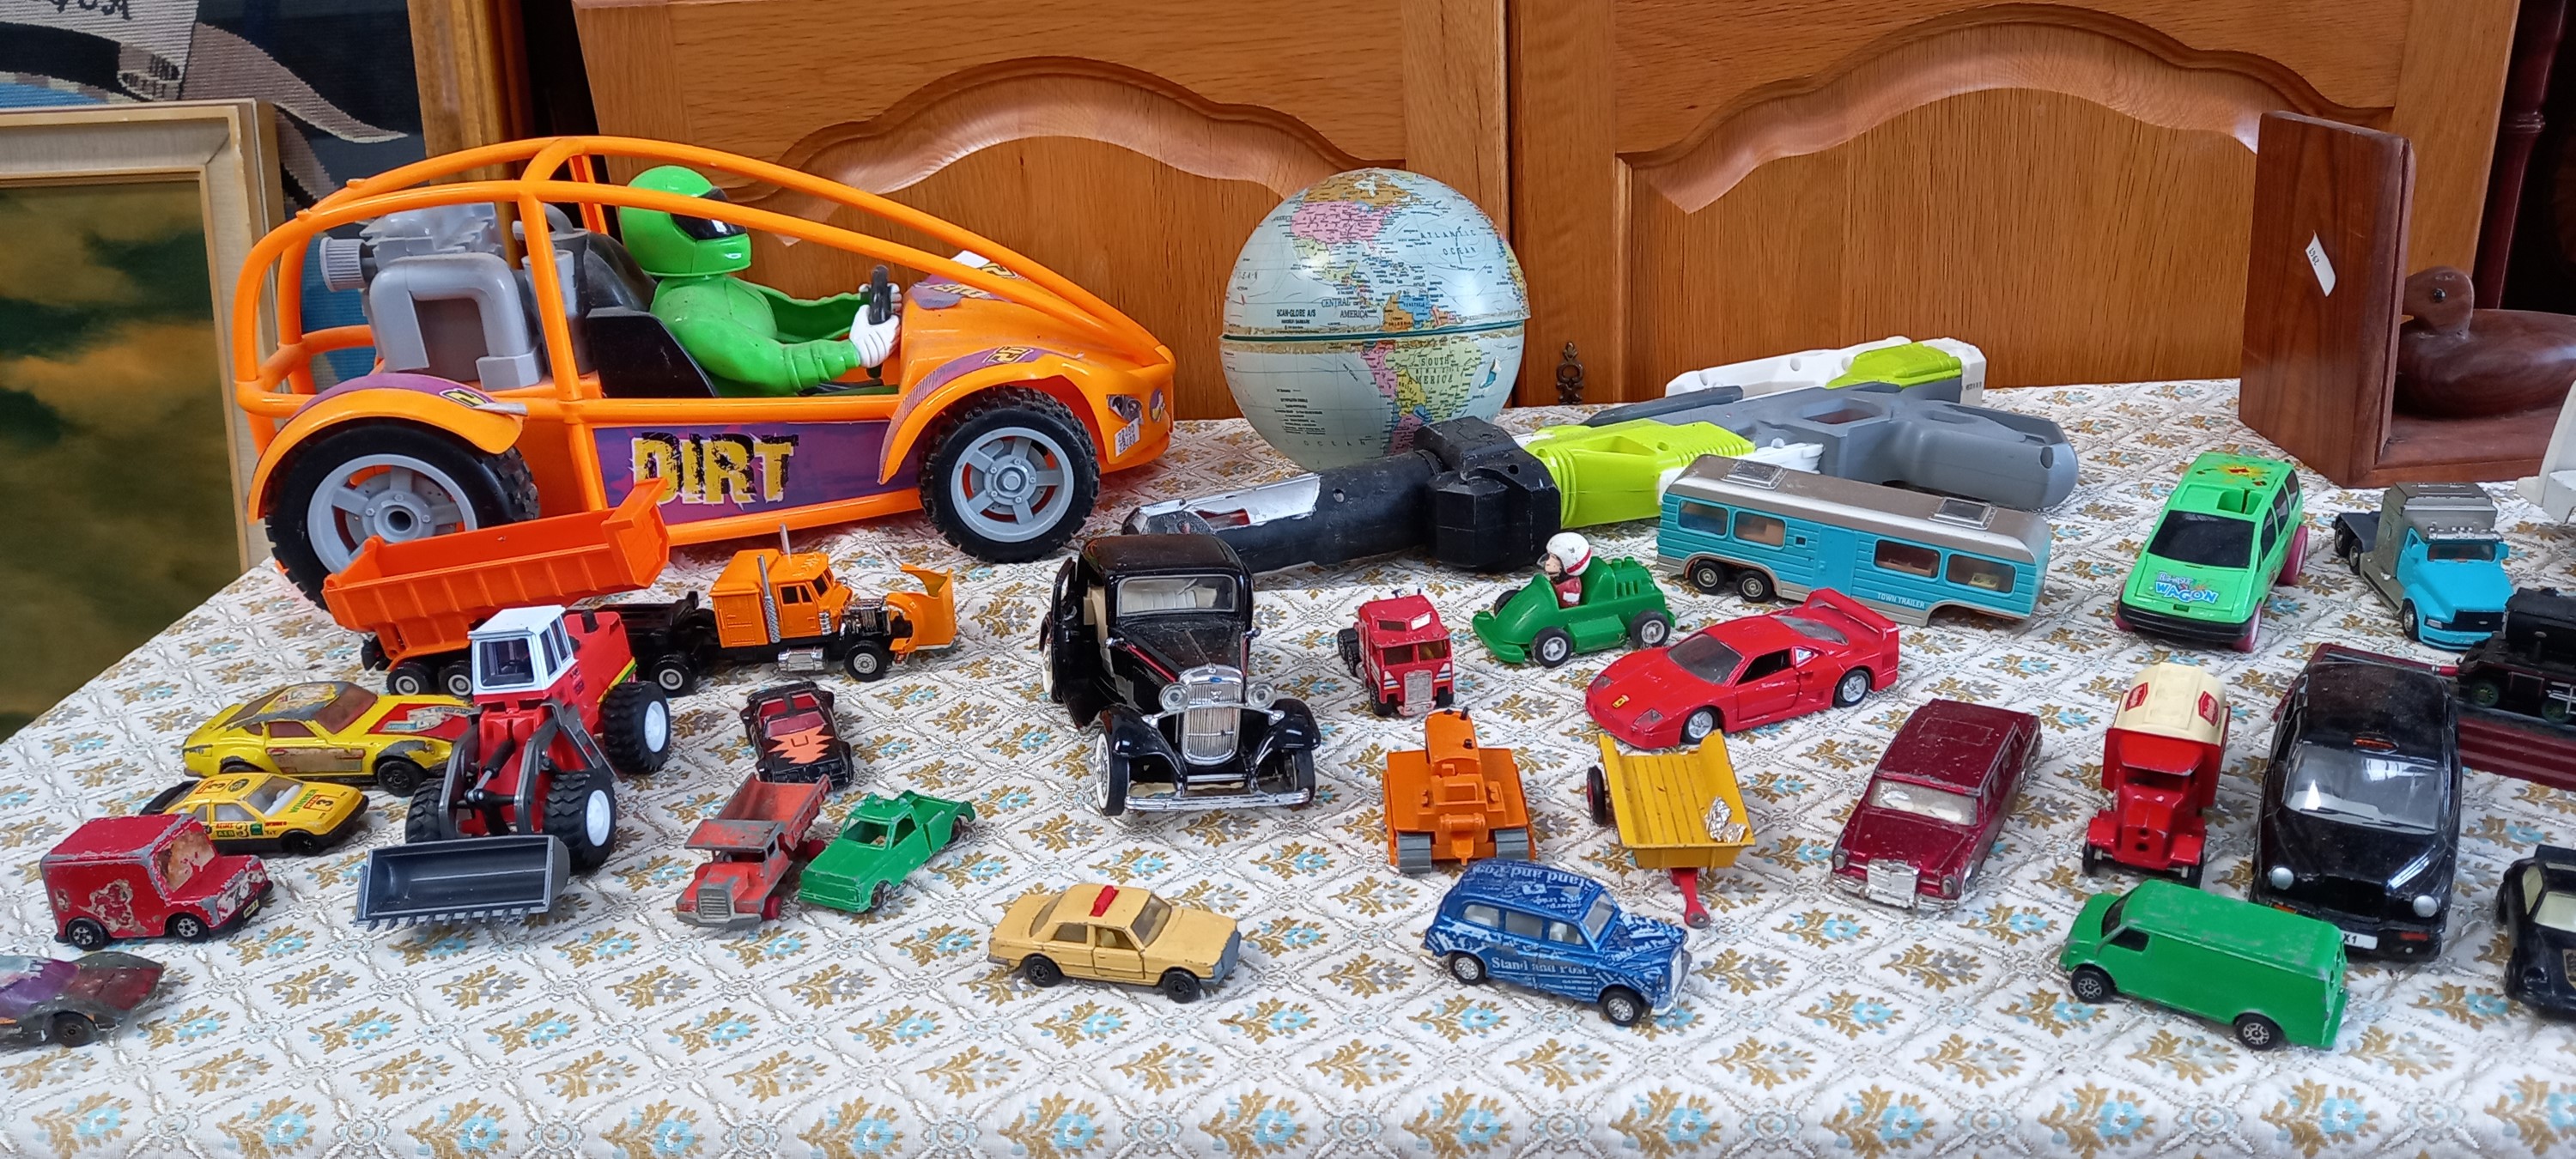 Corgi, Matchbox and other cars and toys in one box. - Image 2 of 4